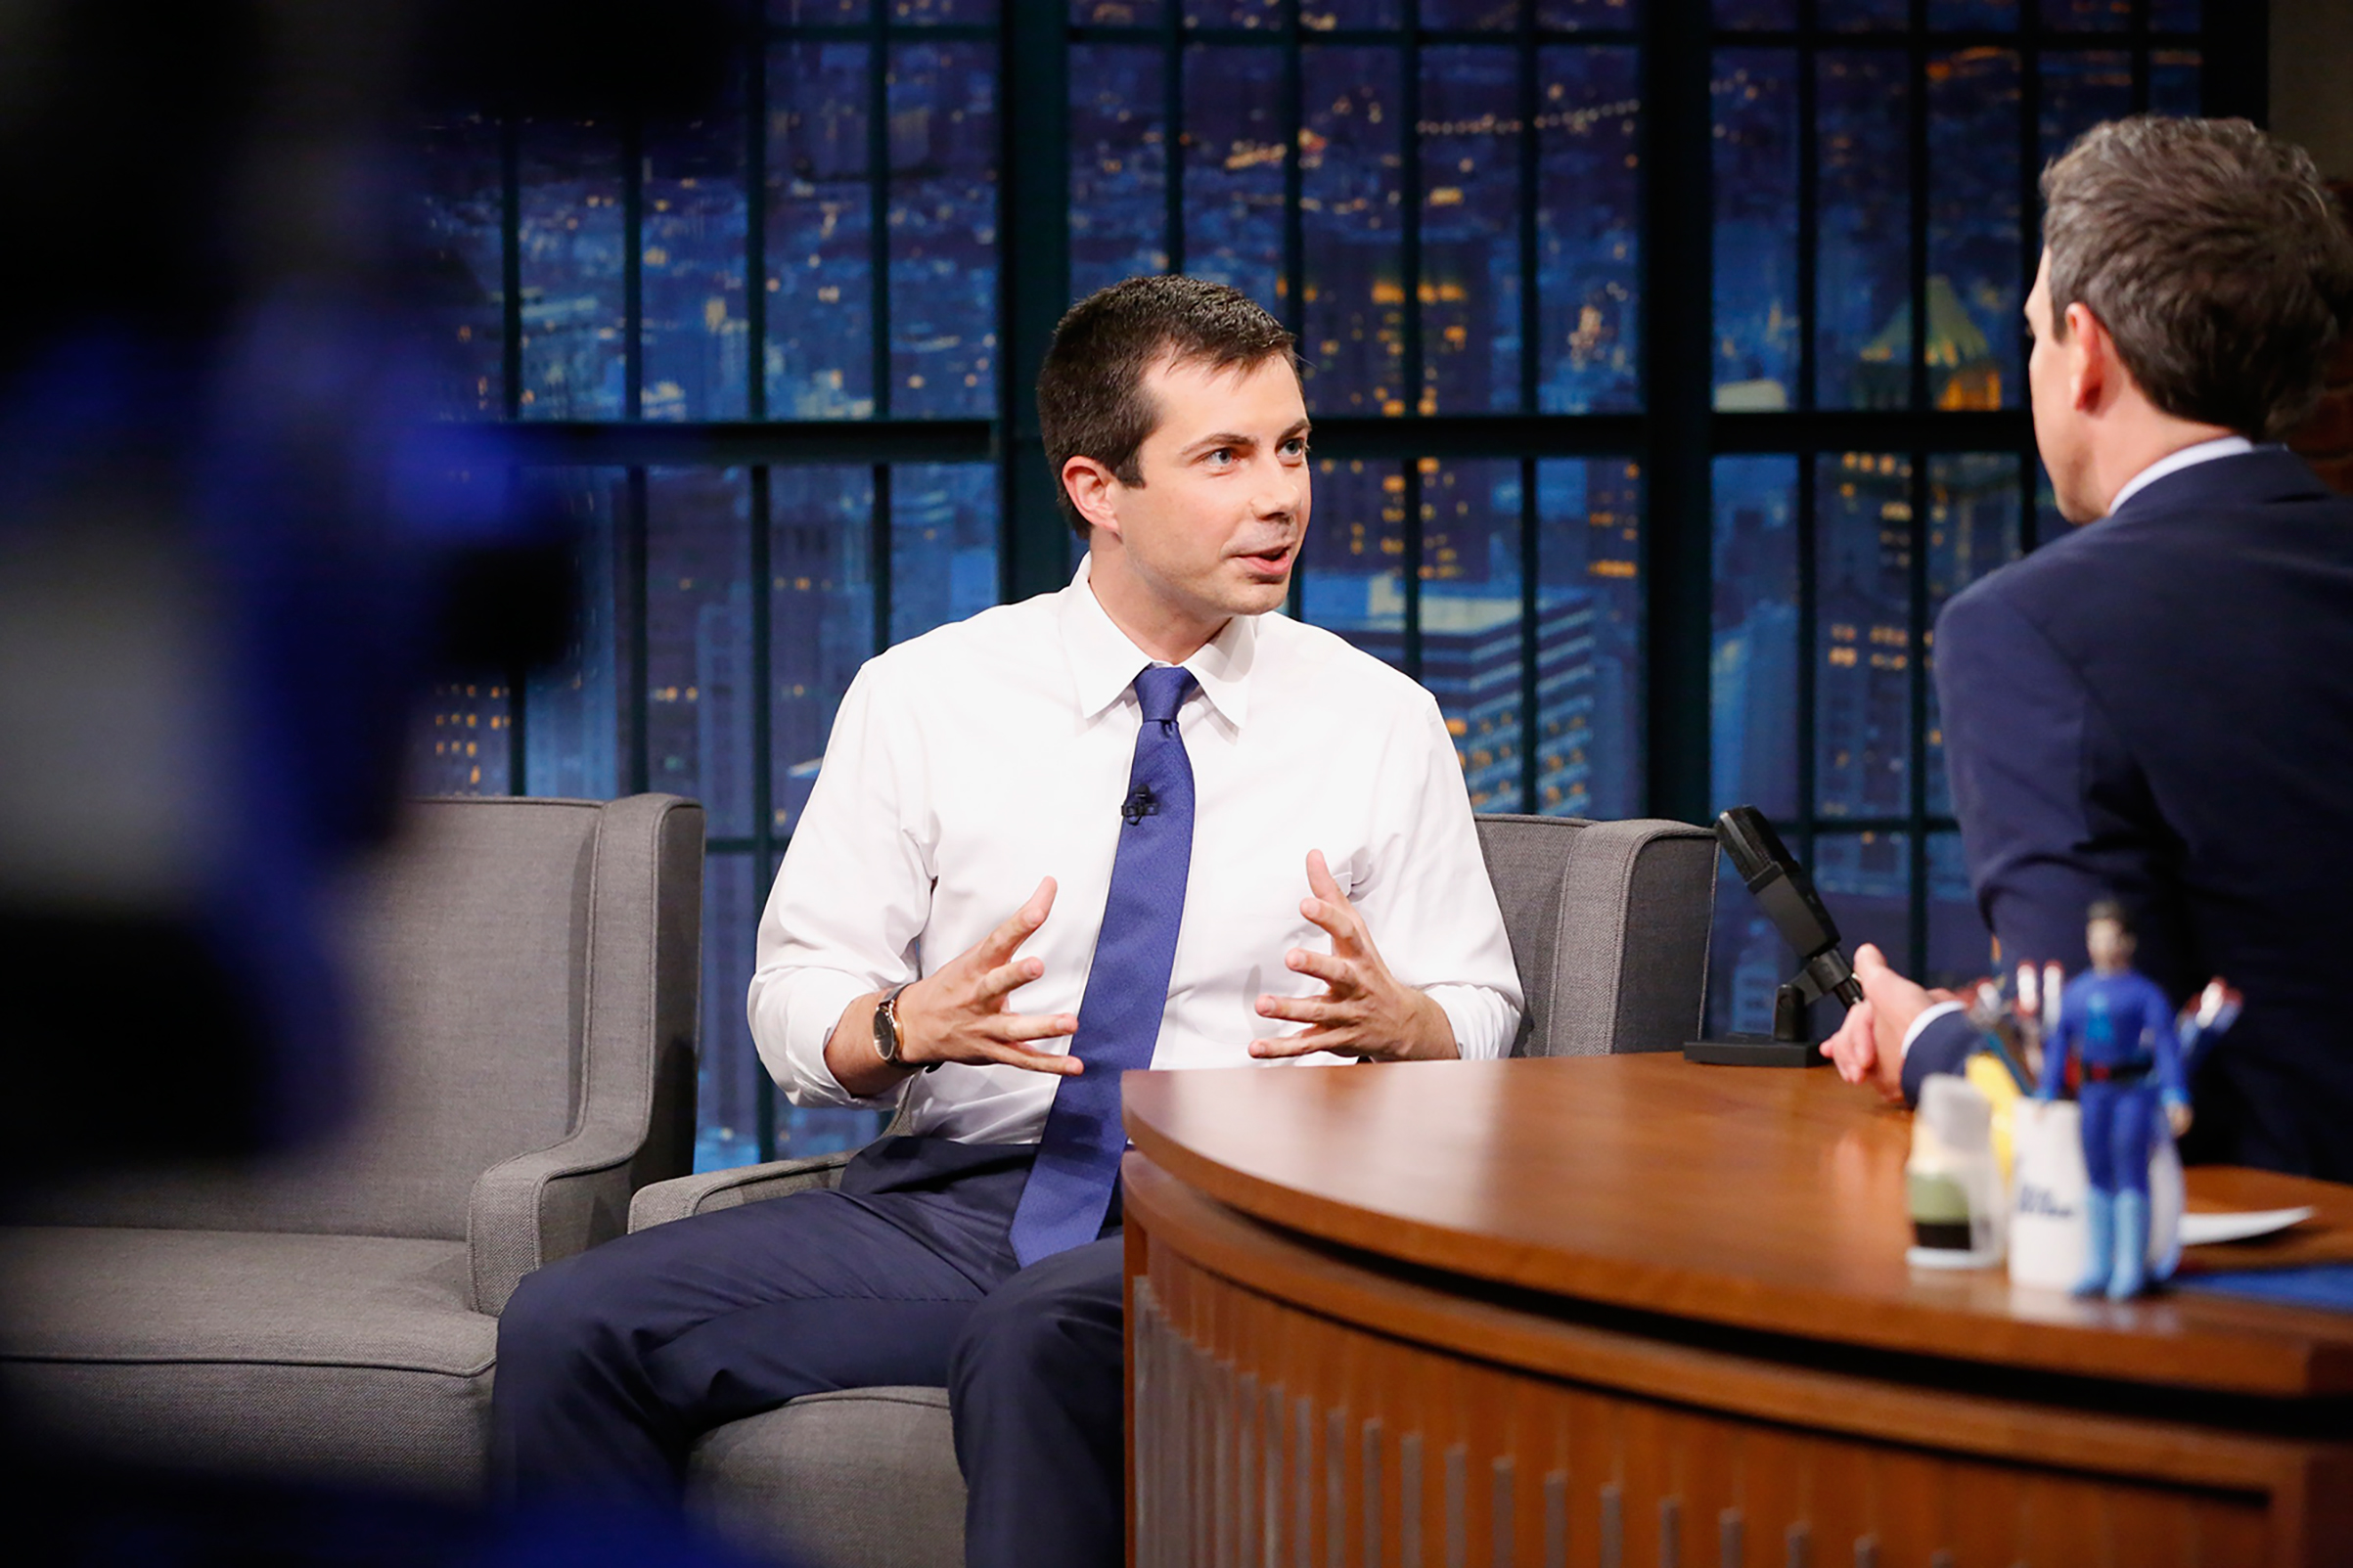 Pete Buttigieg - The 35-year-old, pictured here on Late Night with Seth Meyers, says his view of national security was shaped by serving in Afghanistan (Lloyd Bishop—NBC/NBCU/Getty Images)